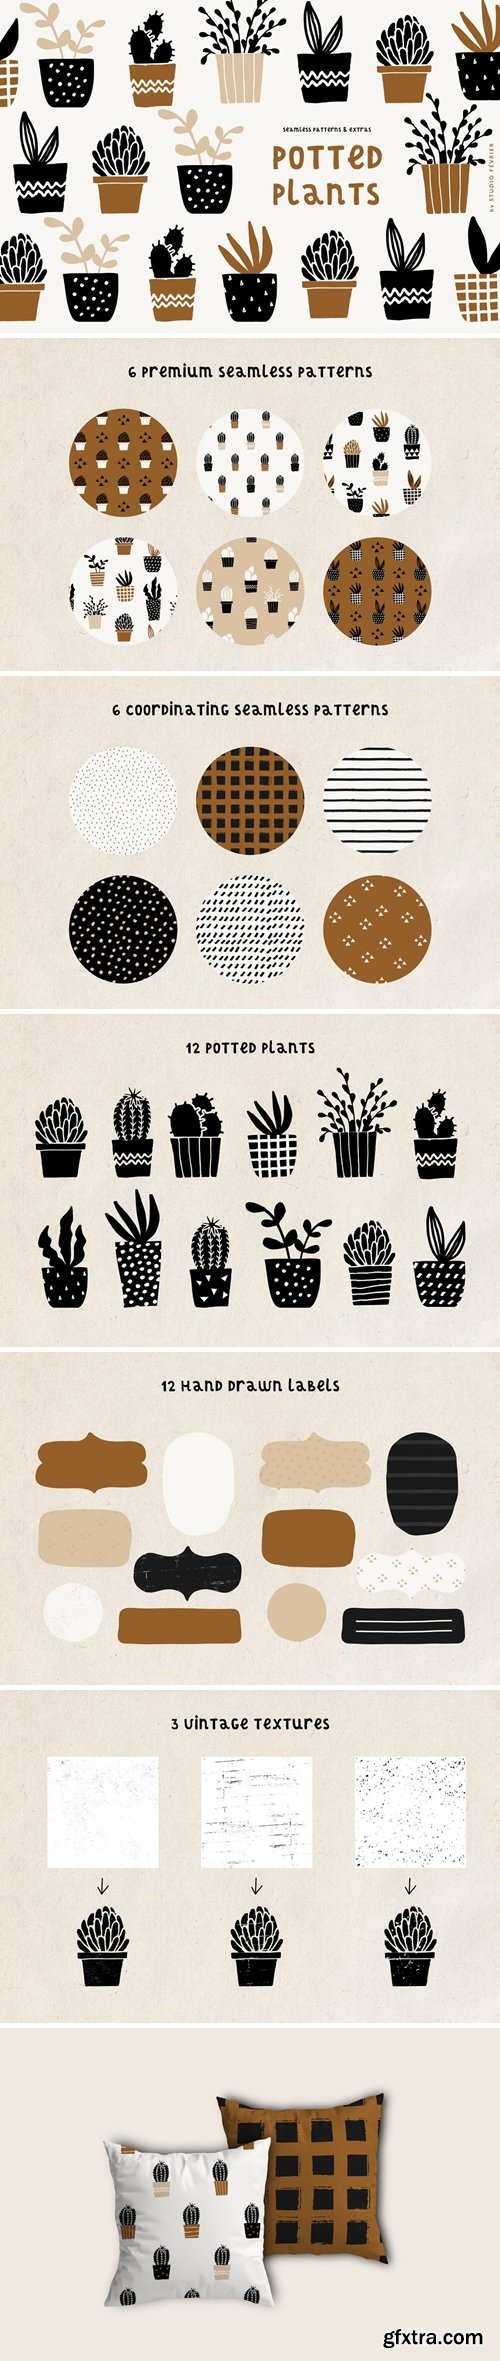 CreativeMarket - Potted Plants | Patterns & Extras 3567173